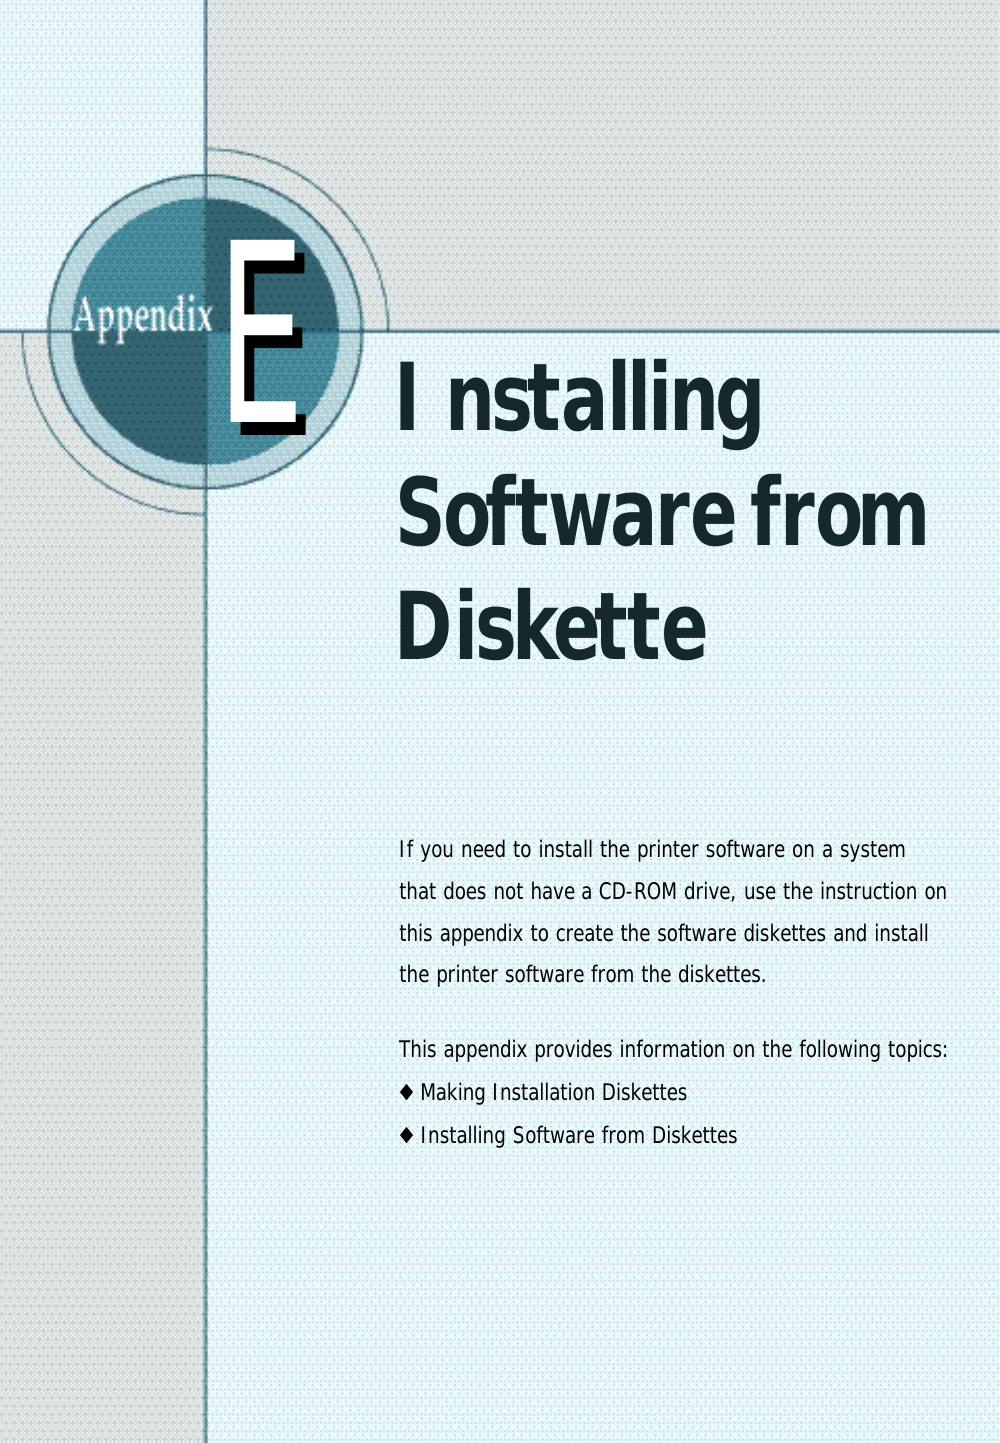 InstallingSoftware fromDisketteIf you need to install the printer software on a system that does not have a CD-ROM drive, use the instruction onthis appendix to create the software diskettes and install the printer software from the diskettes.This appendix provides information on the following topics:◆Making Installation Diskettes◆Installing Software from DiskettesEE